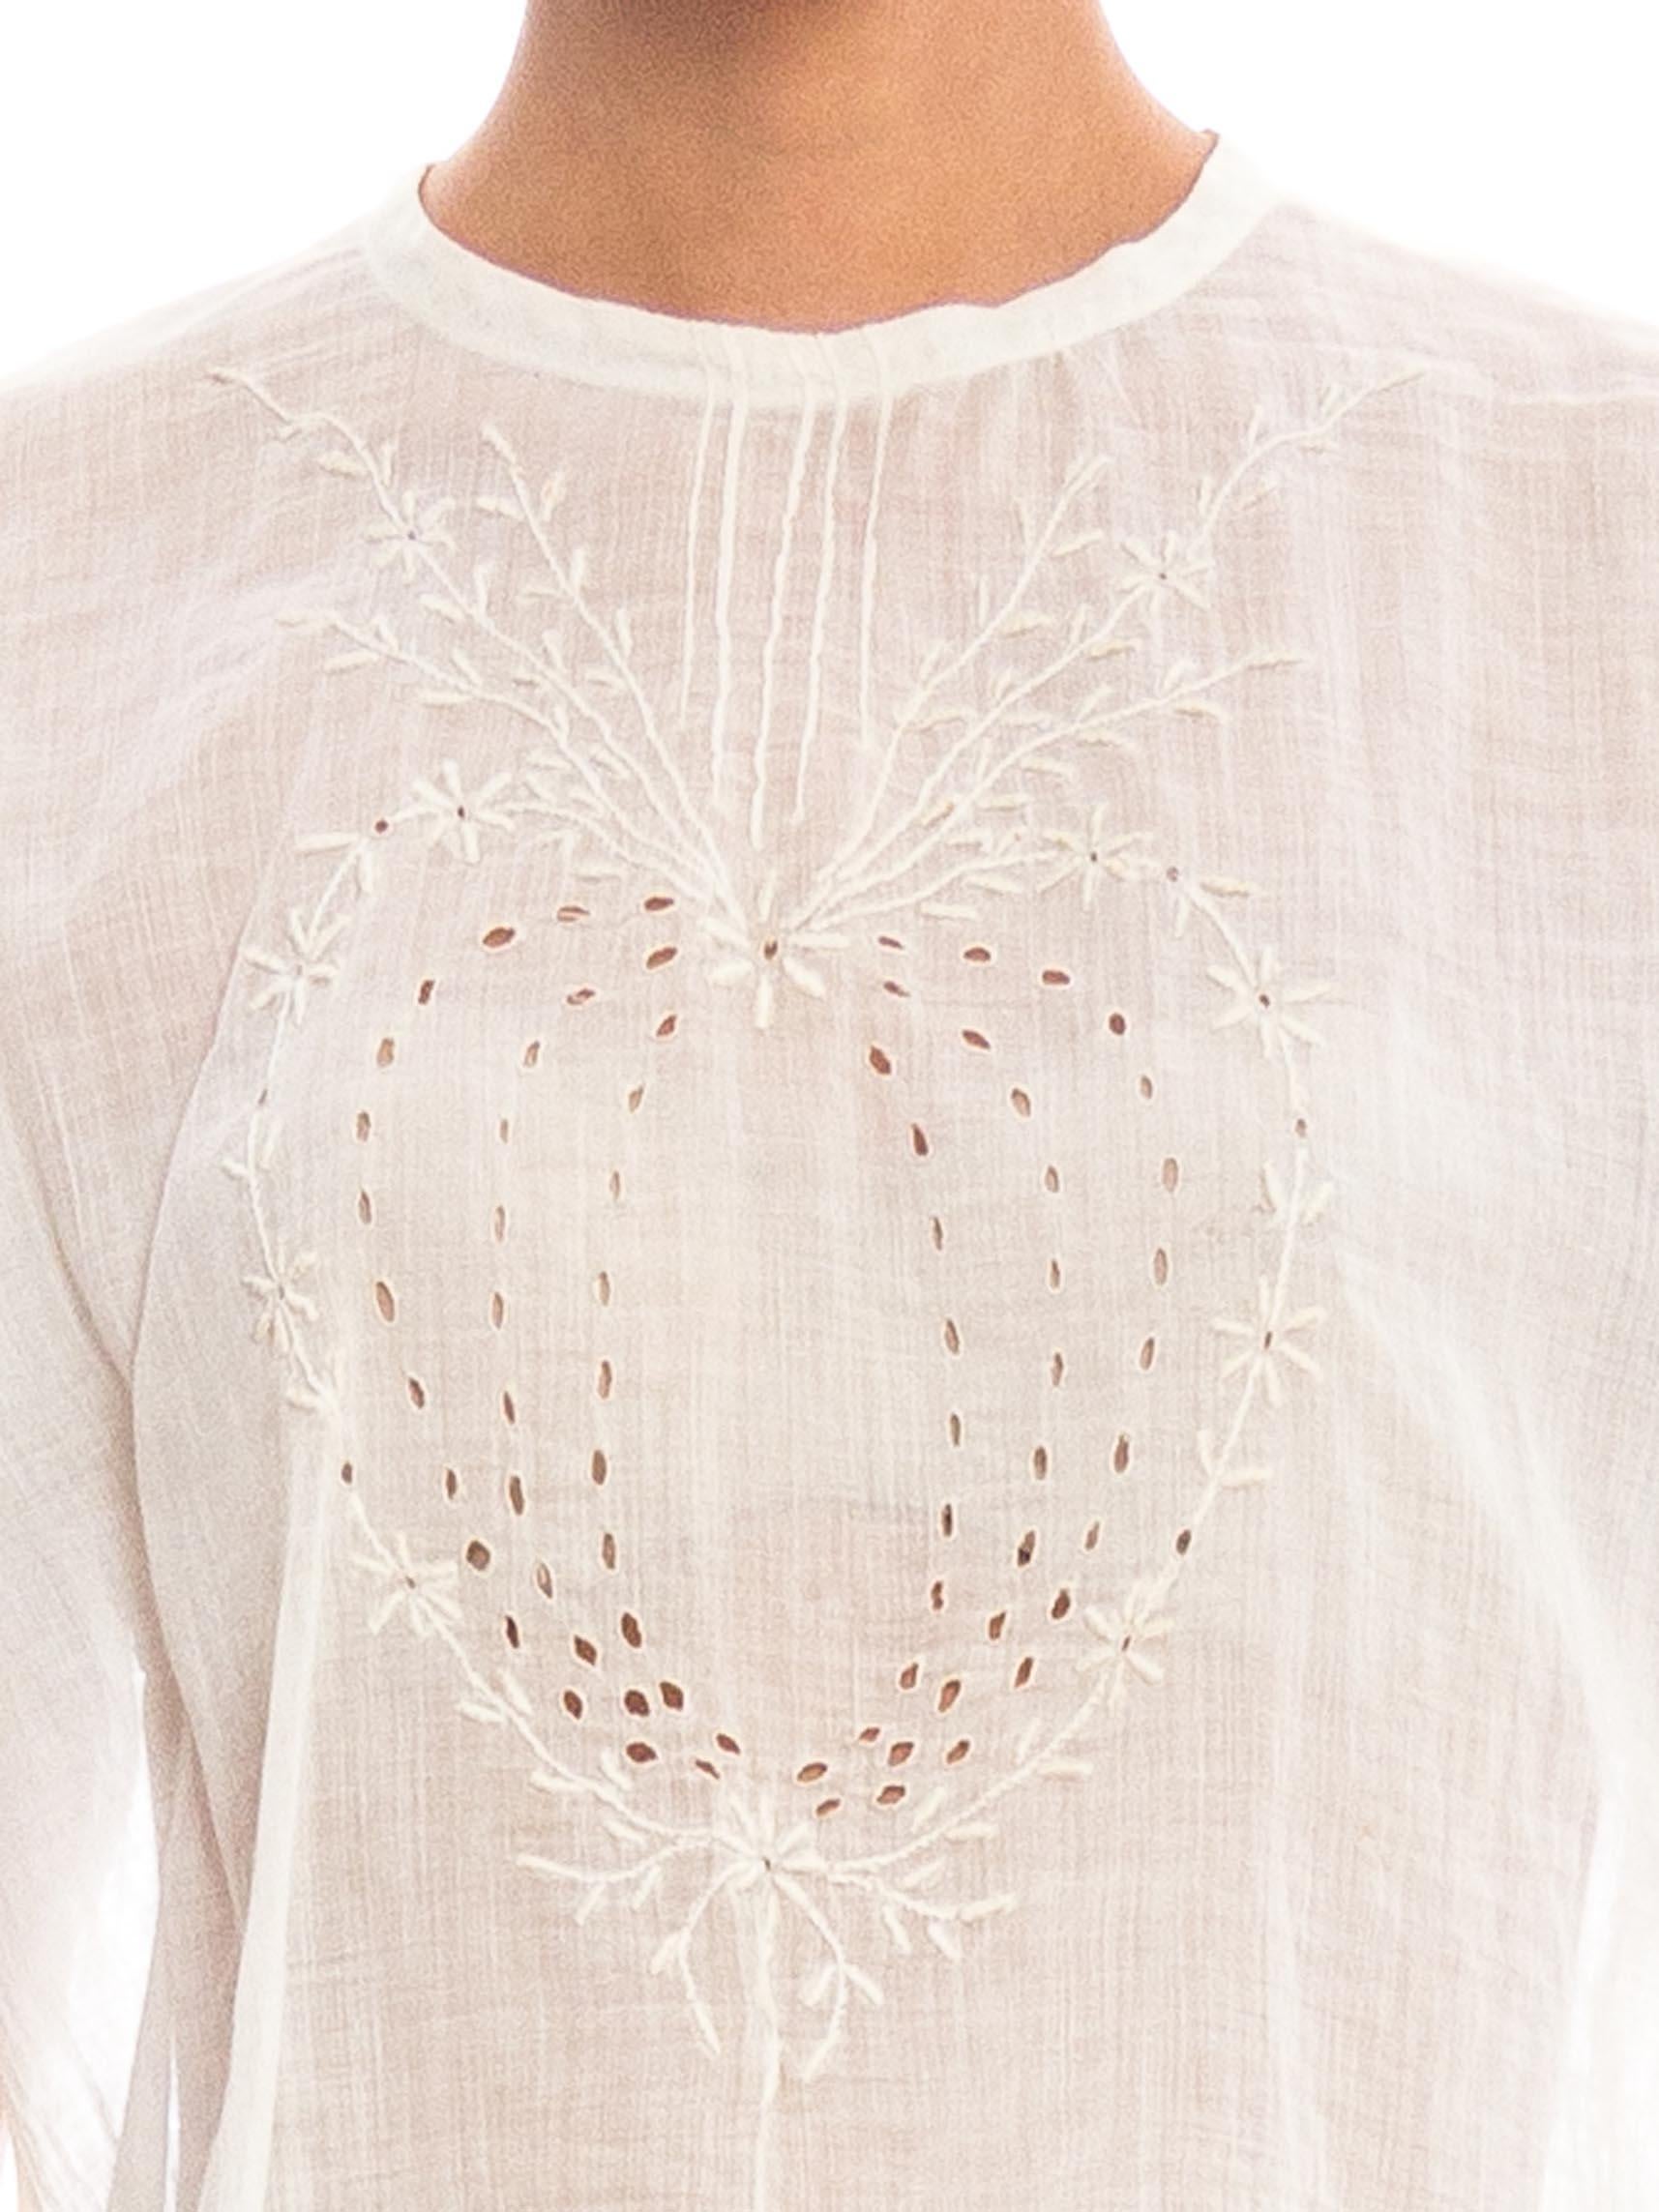 Women's Edwardian White Cotton Voile Blouse With Hand Embroidered Apple Of Eve